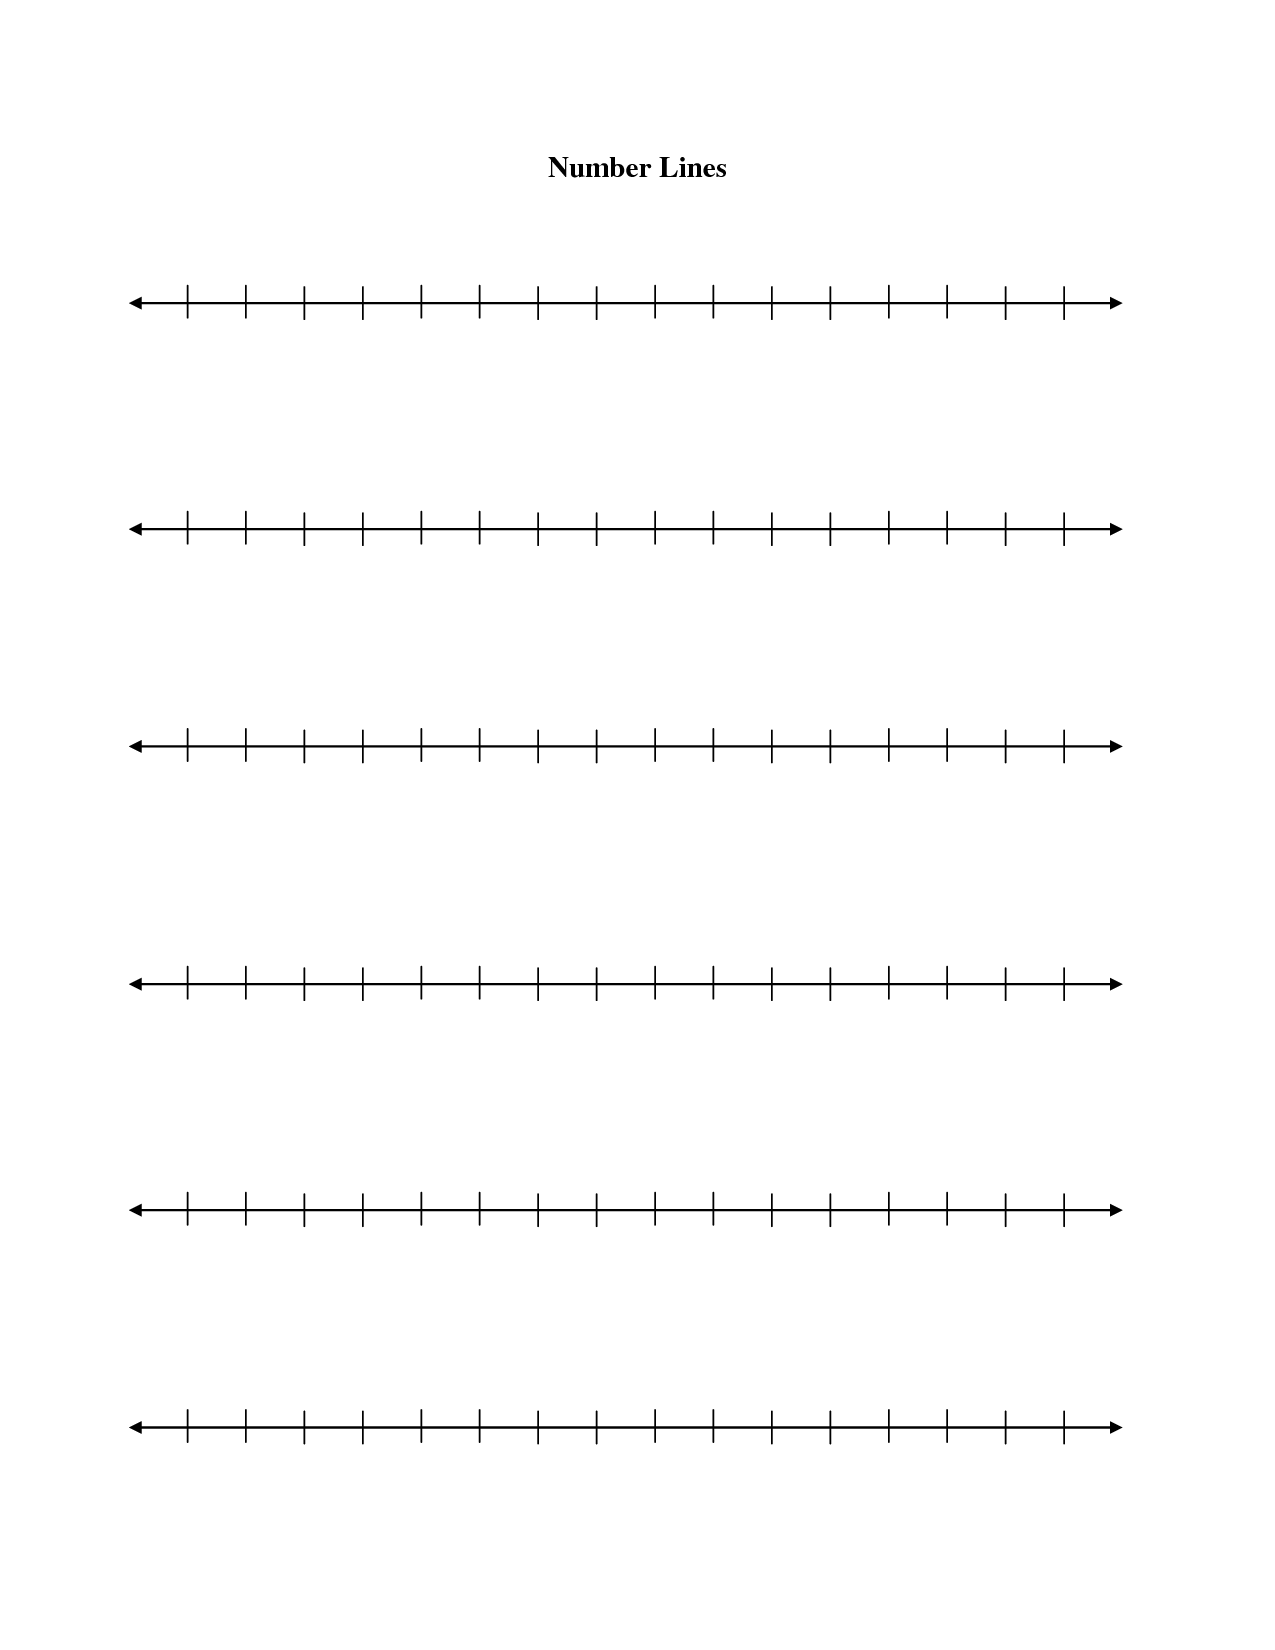 Number Line To 200 Printable Blank Number Line Template